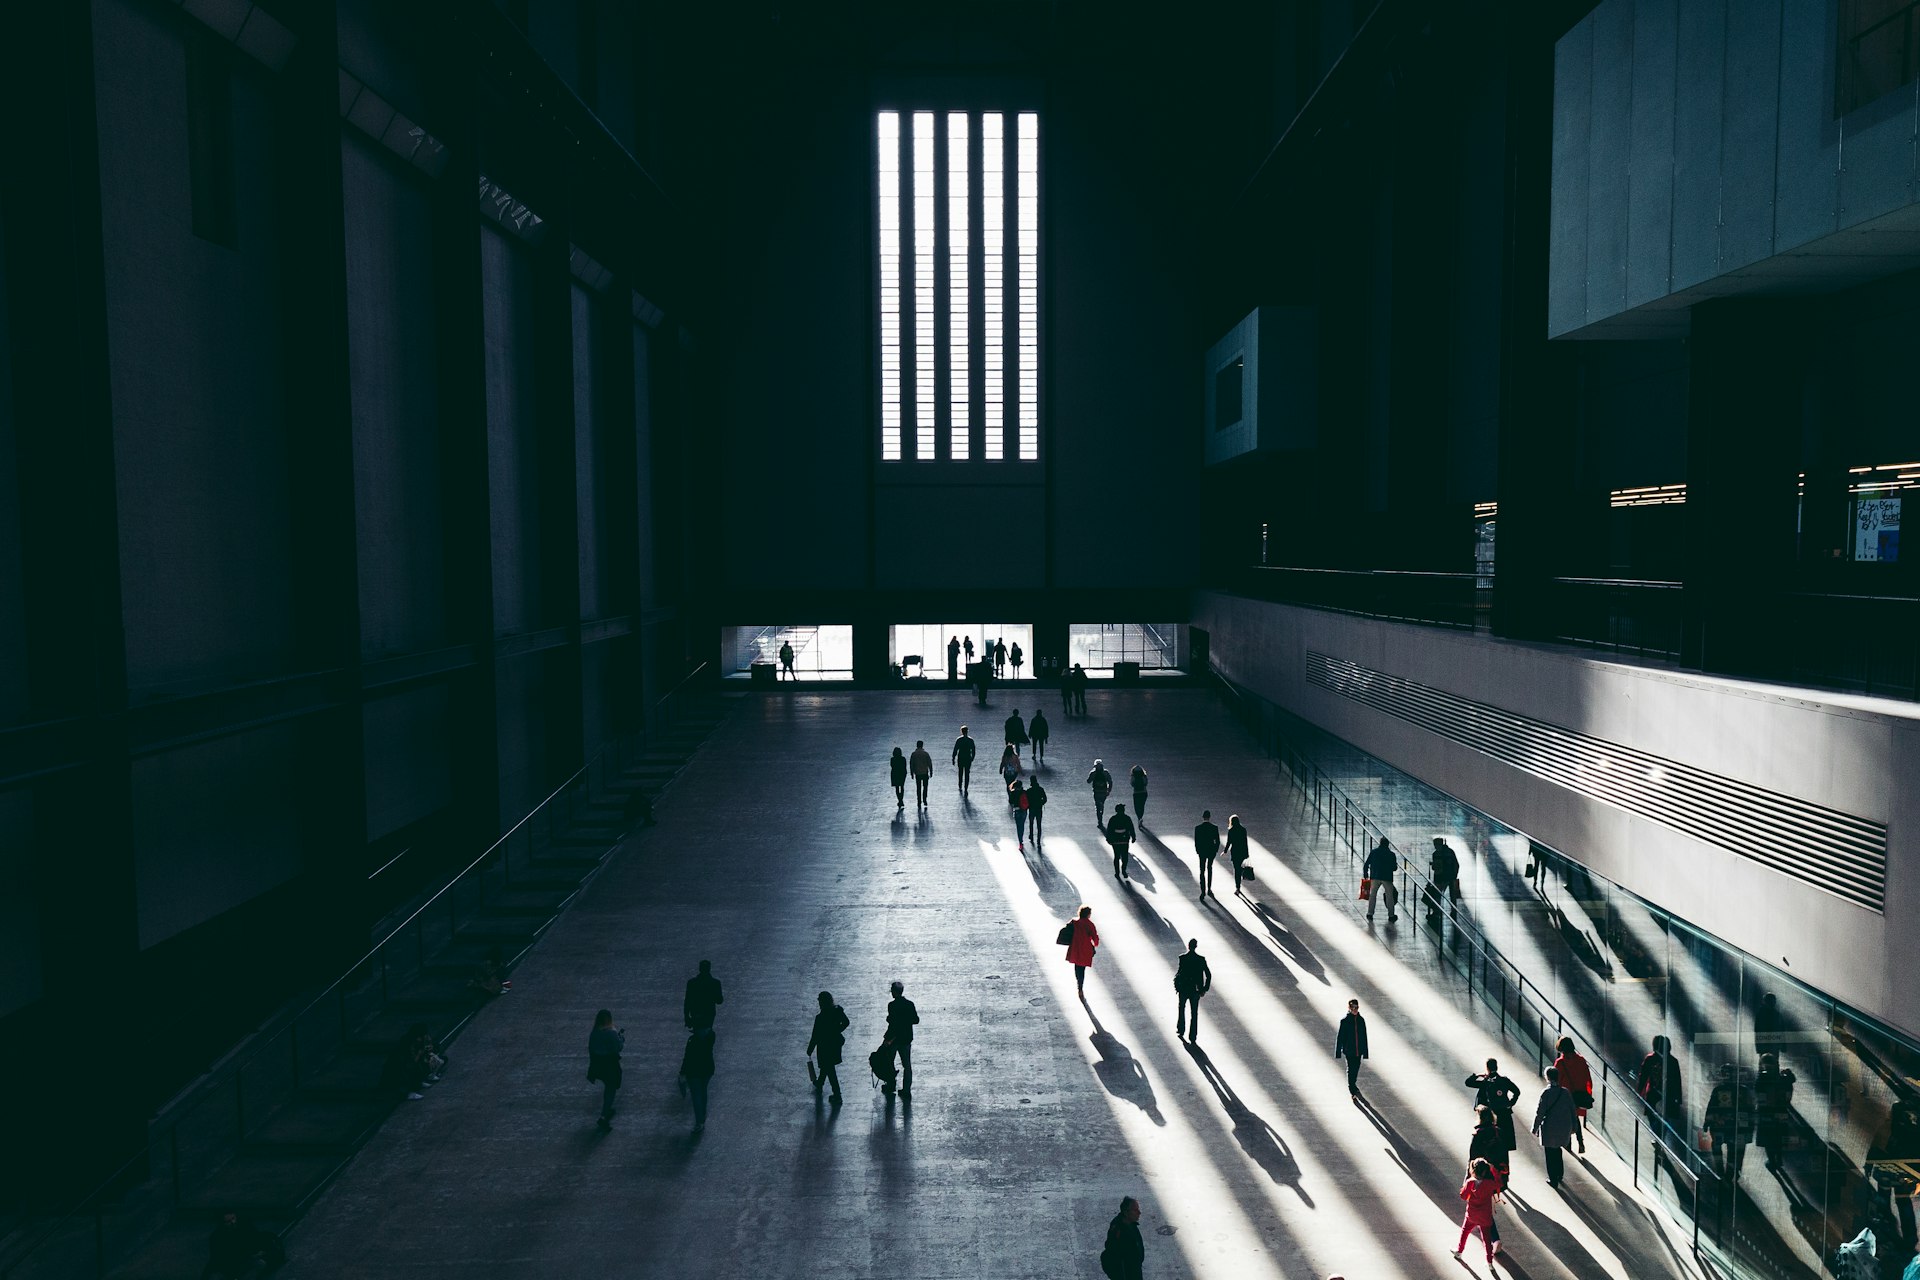 A large open space, the Turbine Hall in the Tate Modern, with people milling around.